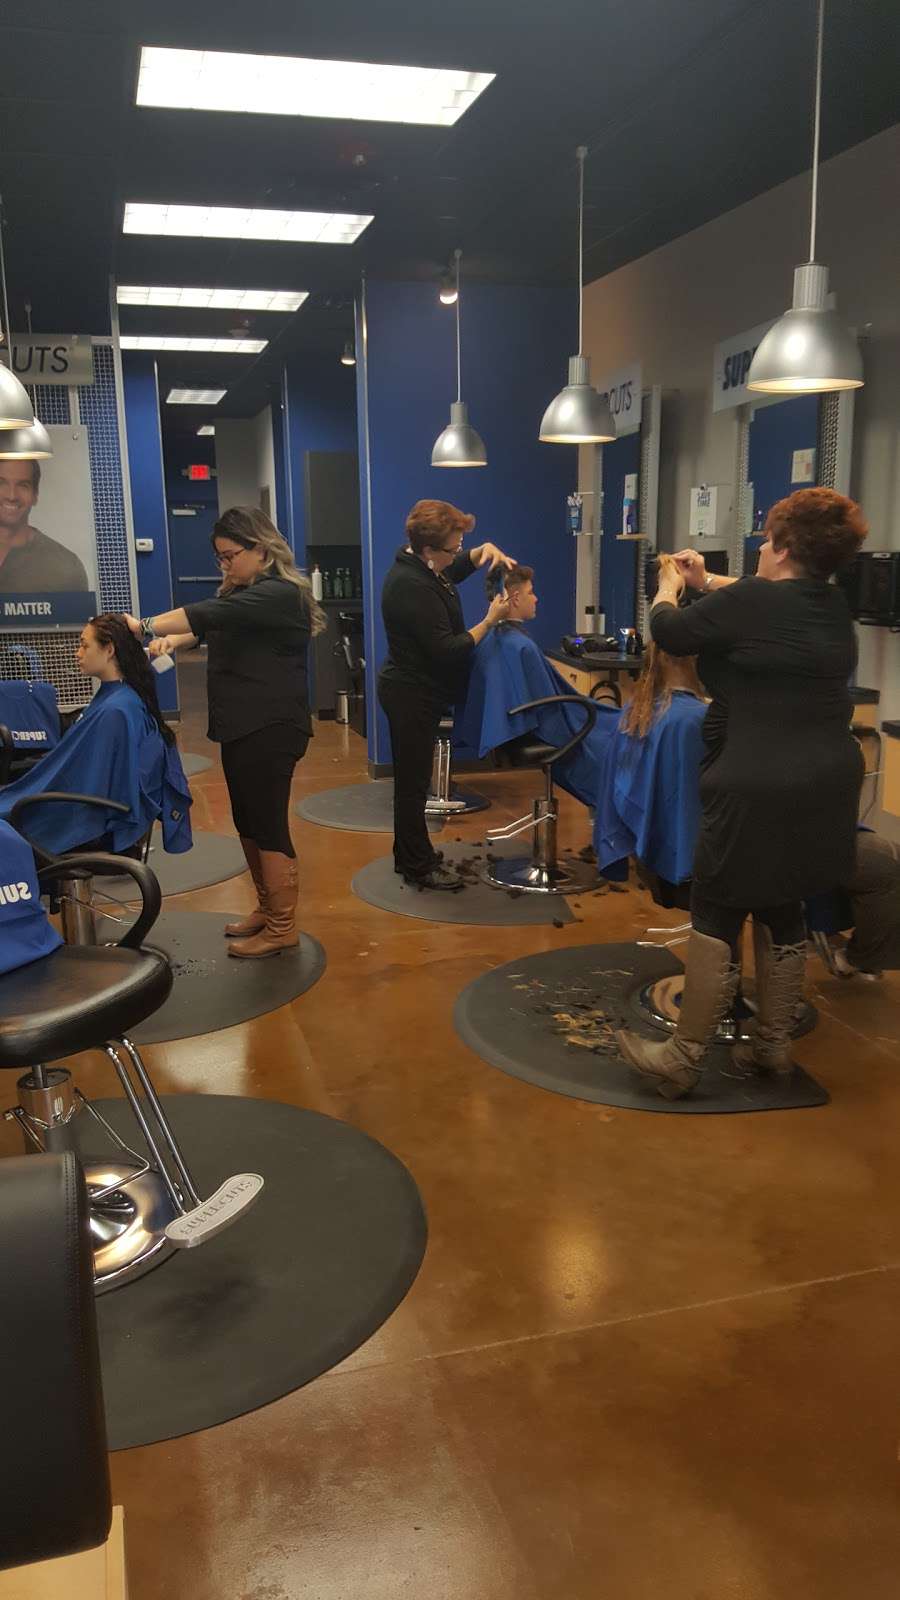 Supercuts | 21968 Marketplace DR ste 200, New Caney, TX 77357 | Phone: (281) 577-3080